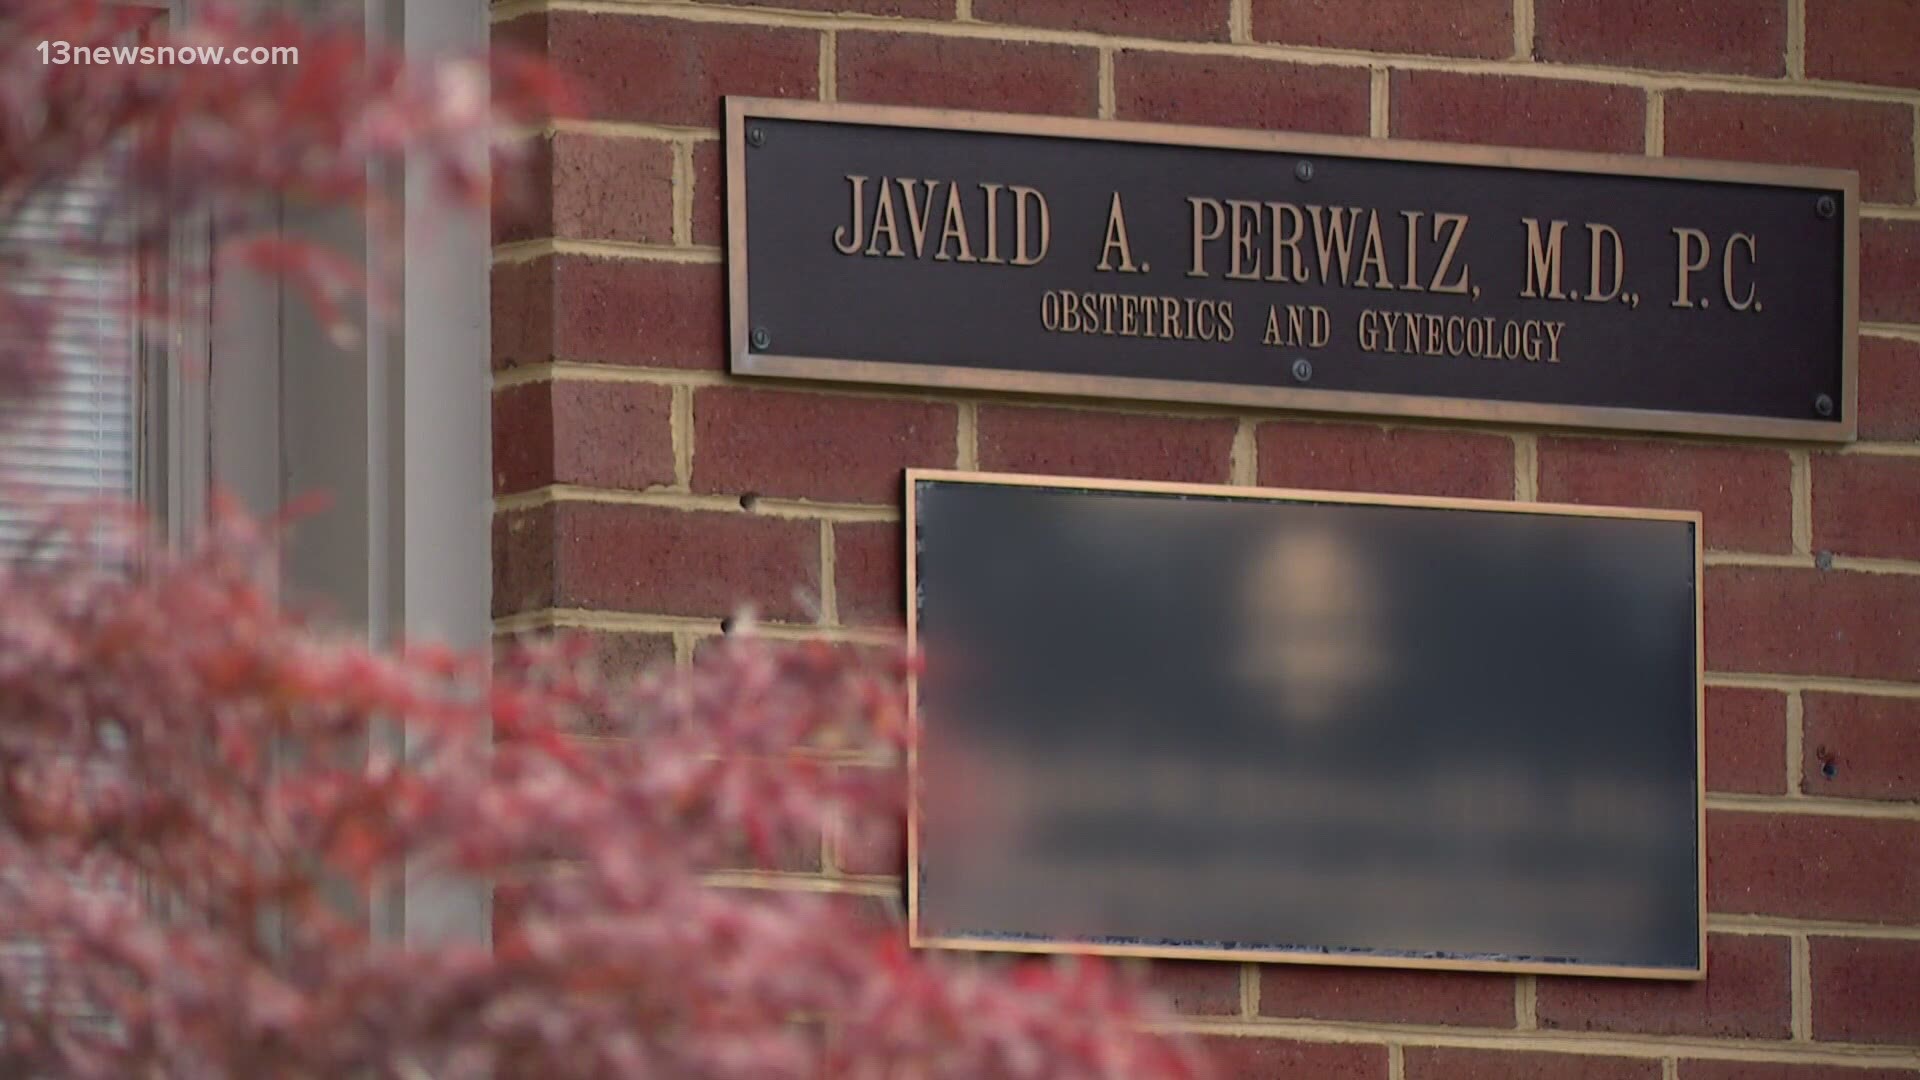 OBGYN Doctor Javaid Perwaiz faces 61 counts in federal court, including health care fraud and more. Now his fate is in the hands of 12 jurors, who must agree 100%.